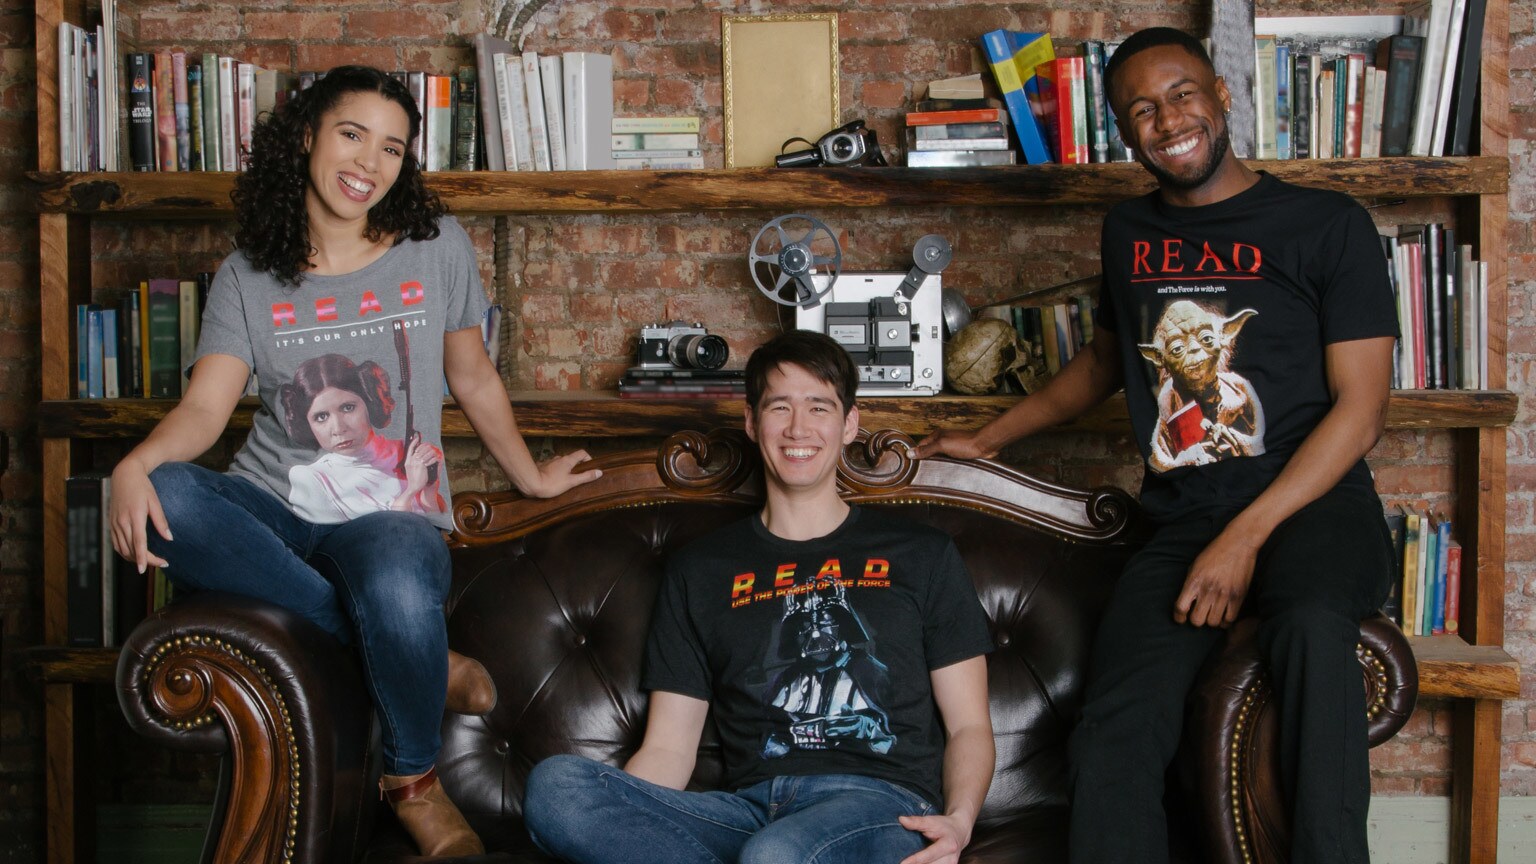 Out of Print Launches a New Star Wars Clothing Line with Retro Flair – Exclusive Reveal